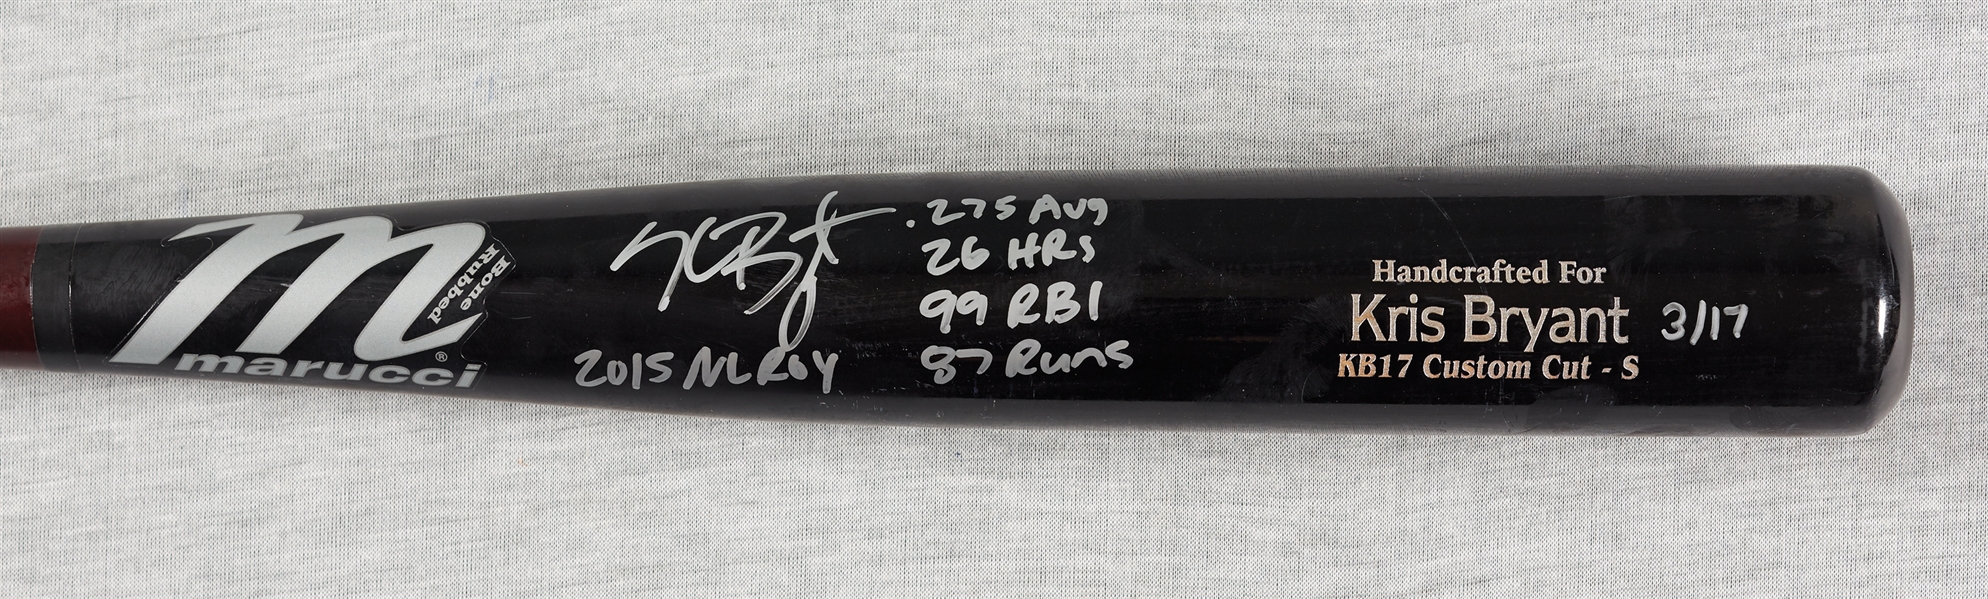 Kris Bryant 2015 Game-Used & Signed Marucci Bat with Multiple Inscriptions (3/17) (MLB) (Fanatics)